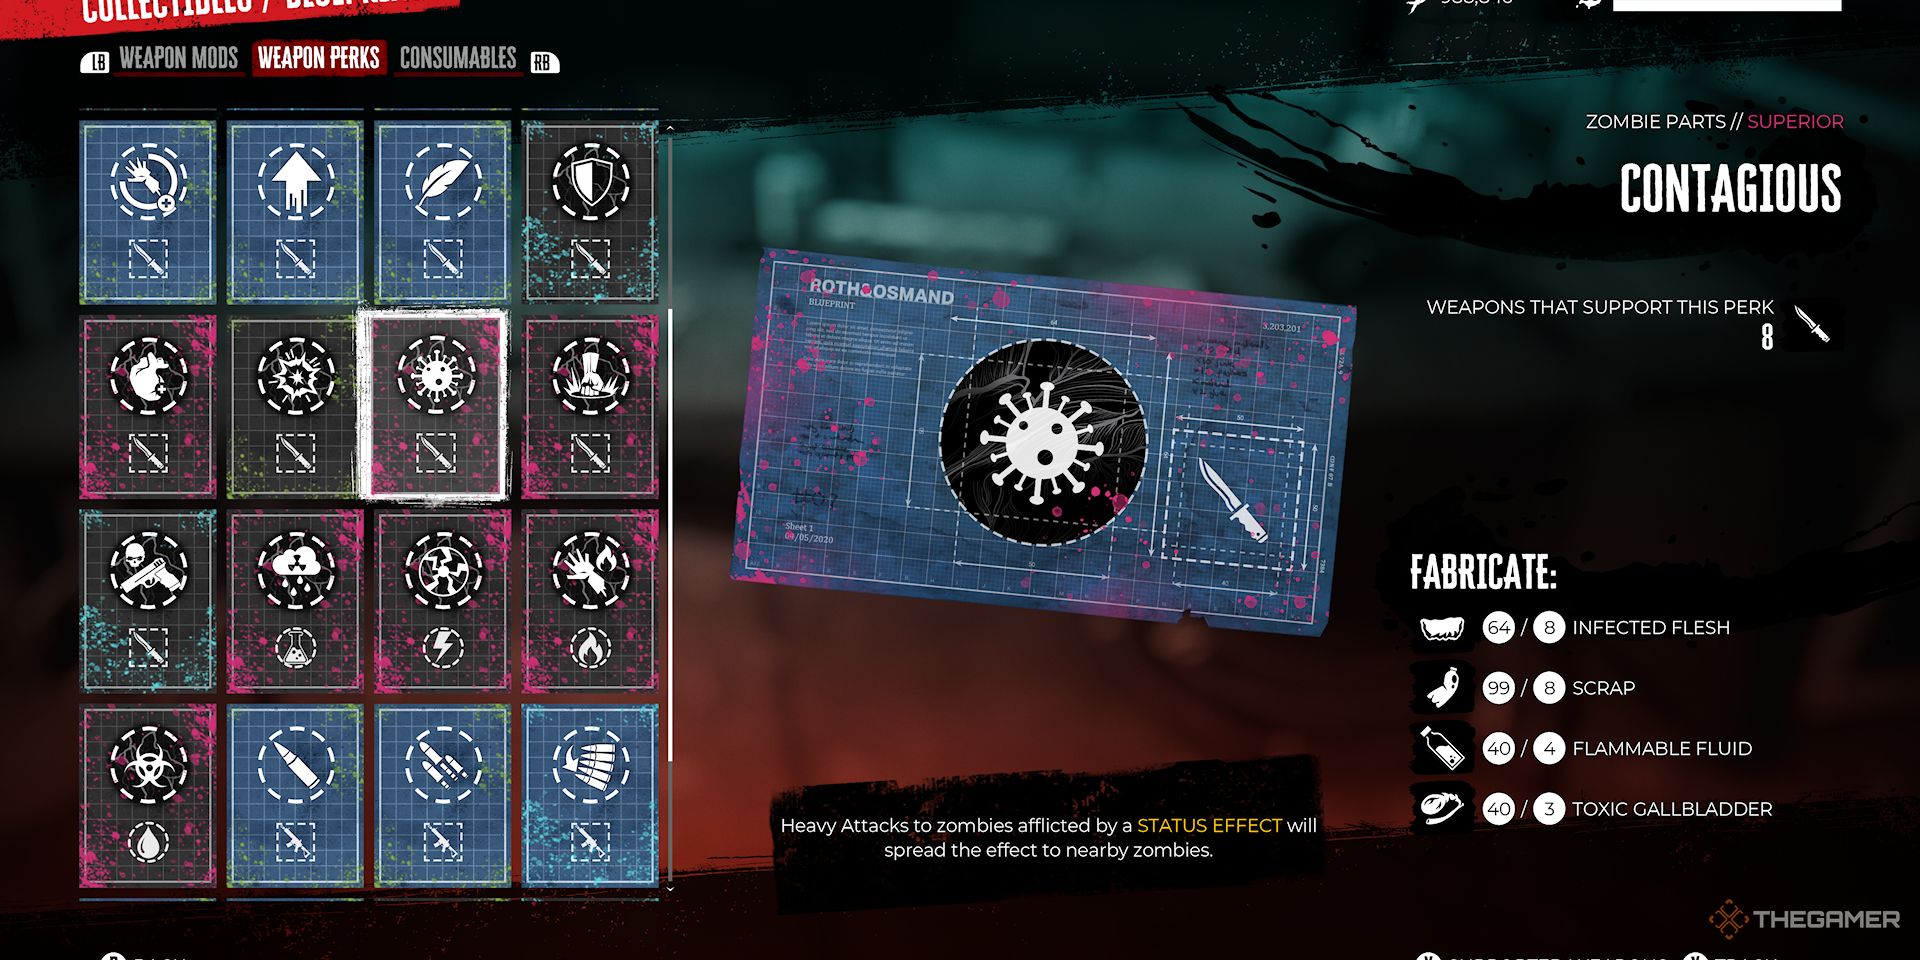 Image shows the contagious Perk in Dead Island 2